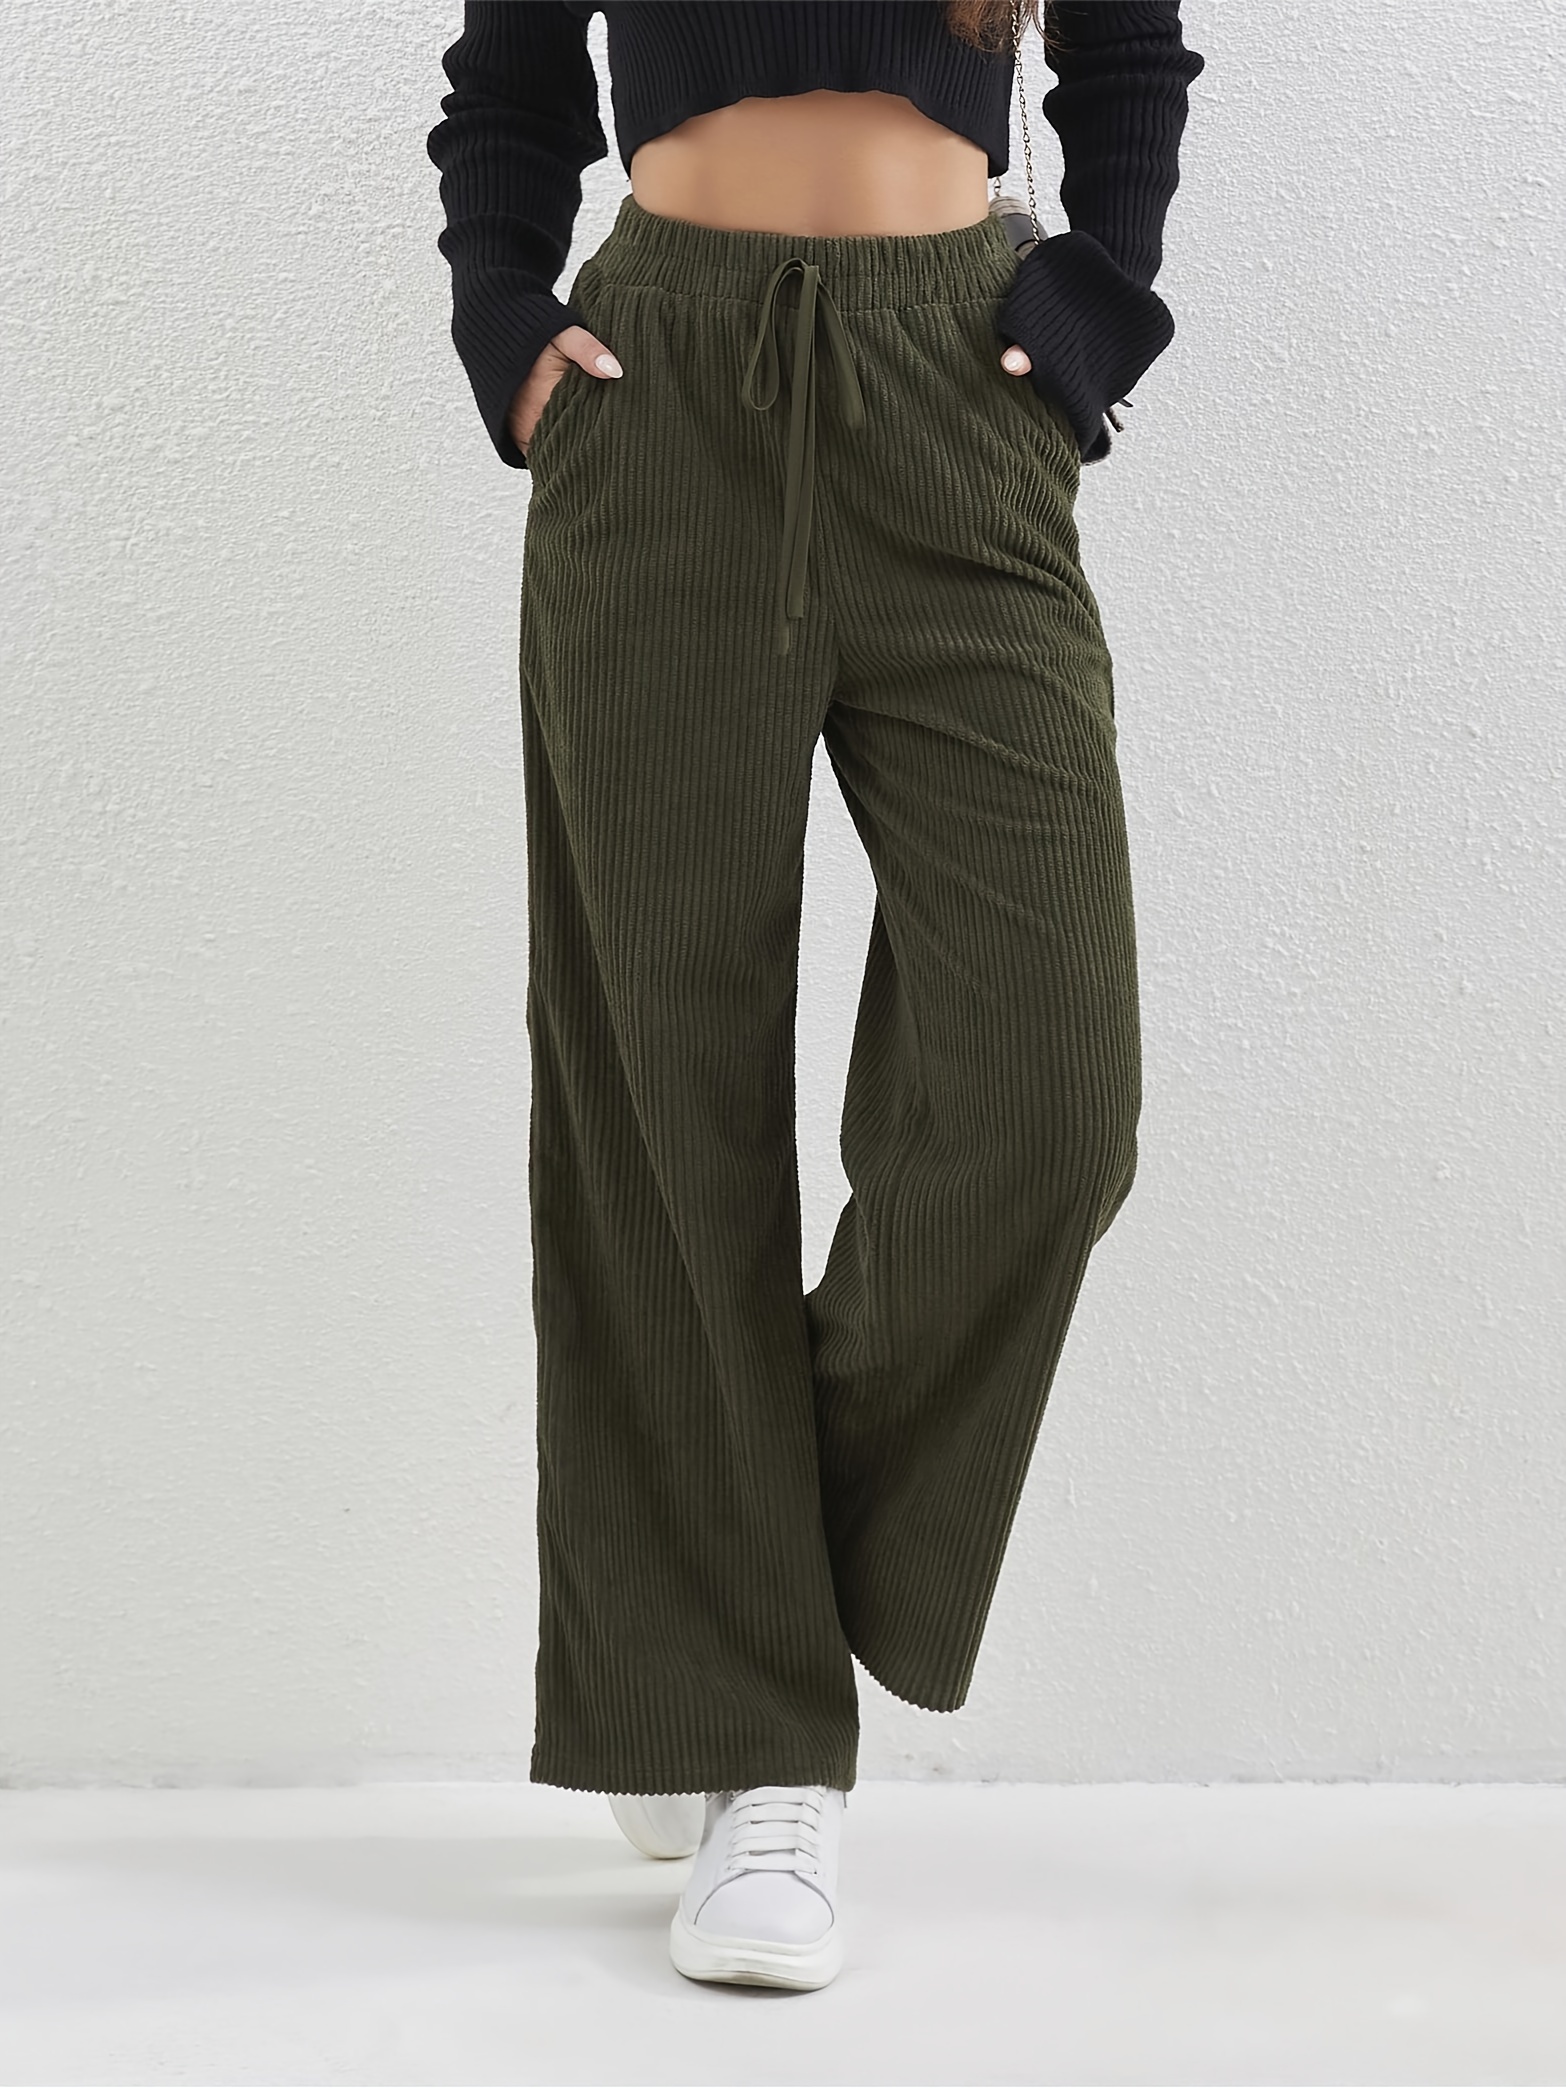 solid corduroy straight leg pants casual high waist loose pants with pocket womens clothing details 5